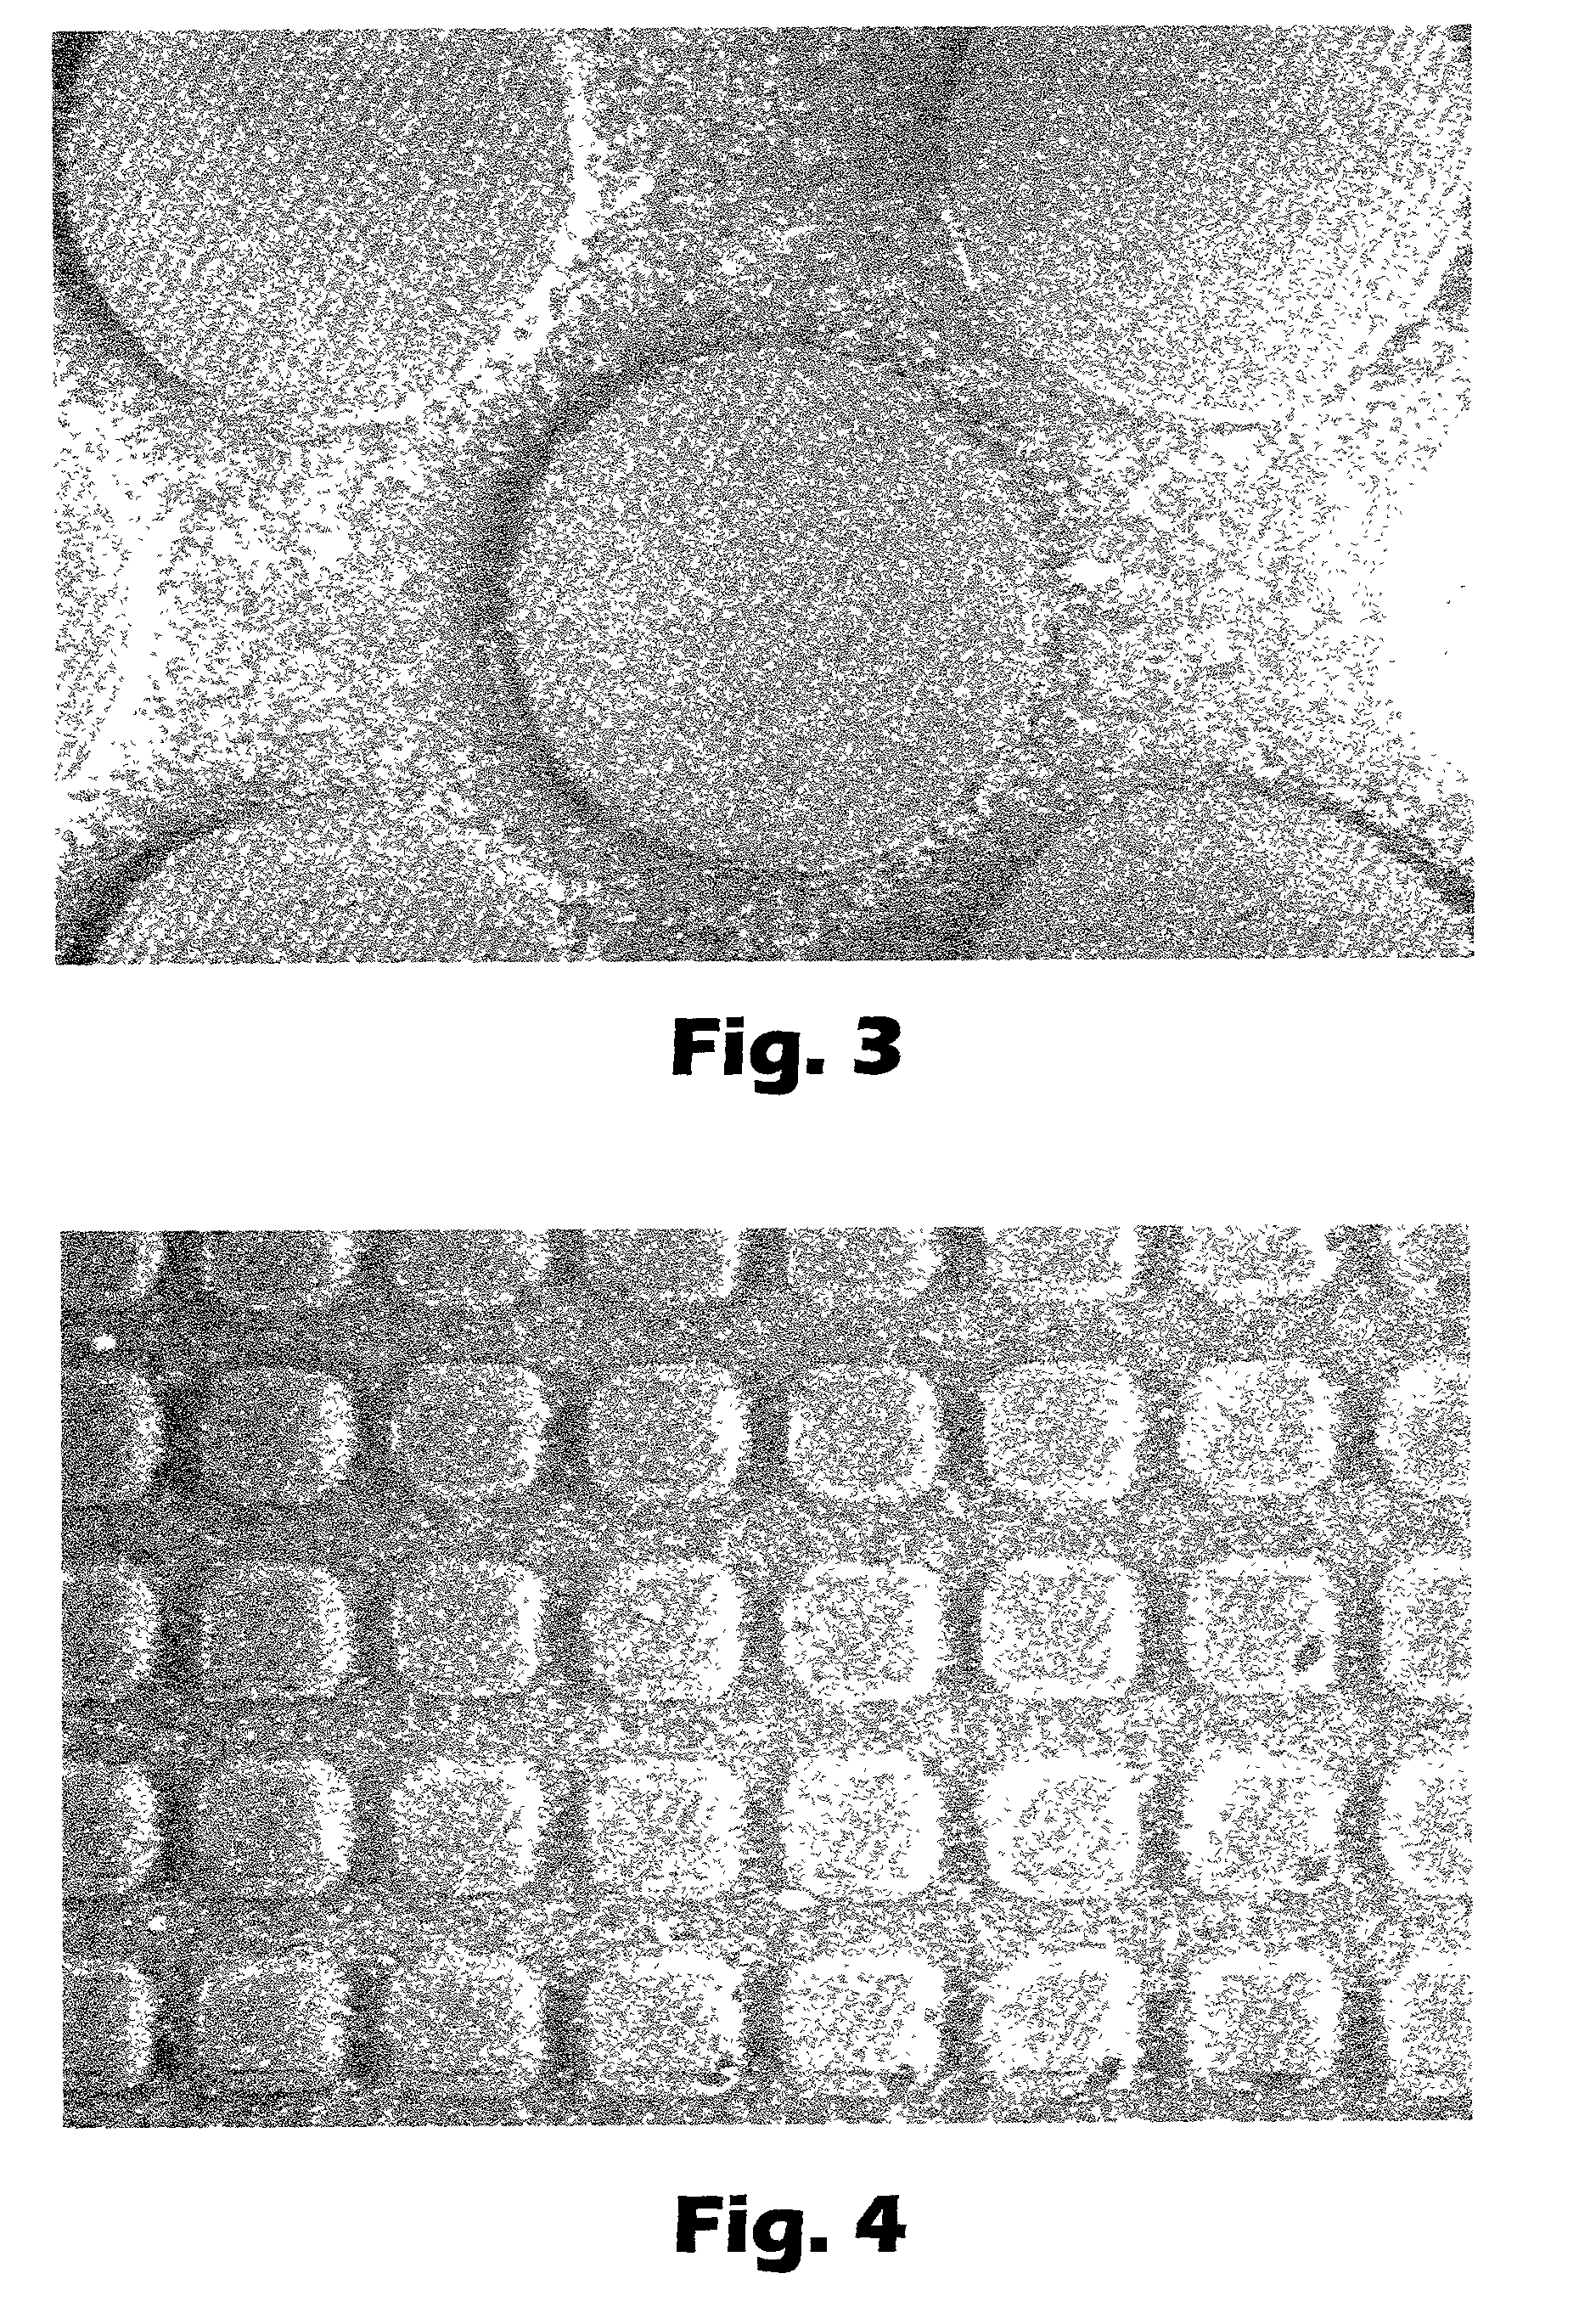 Abrasive product and method of making and using the same